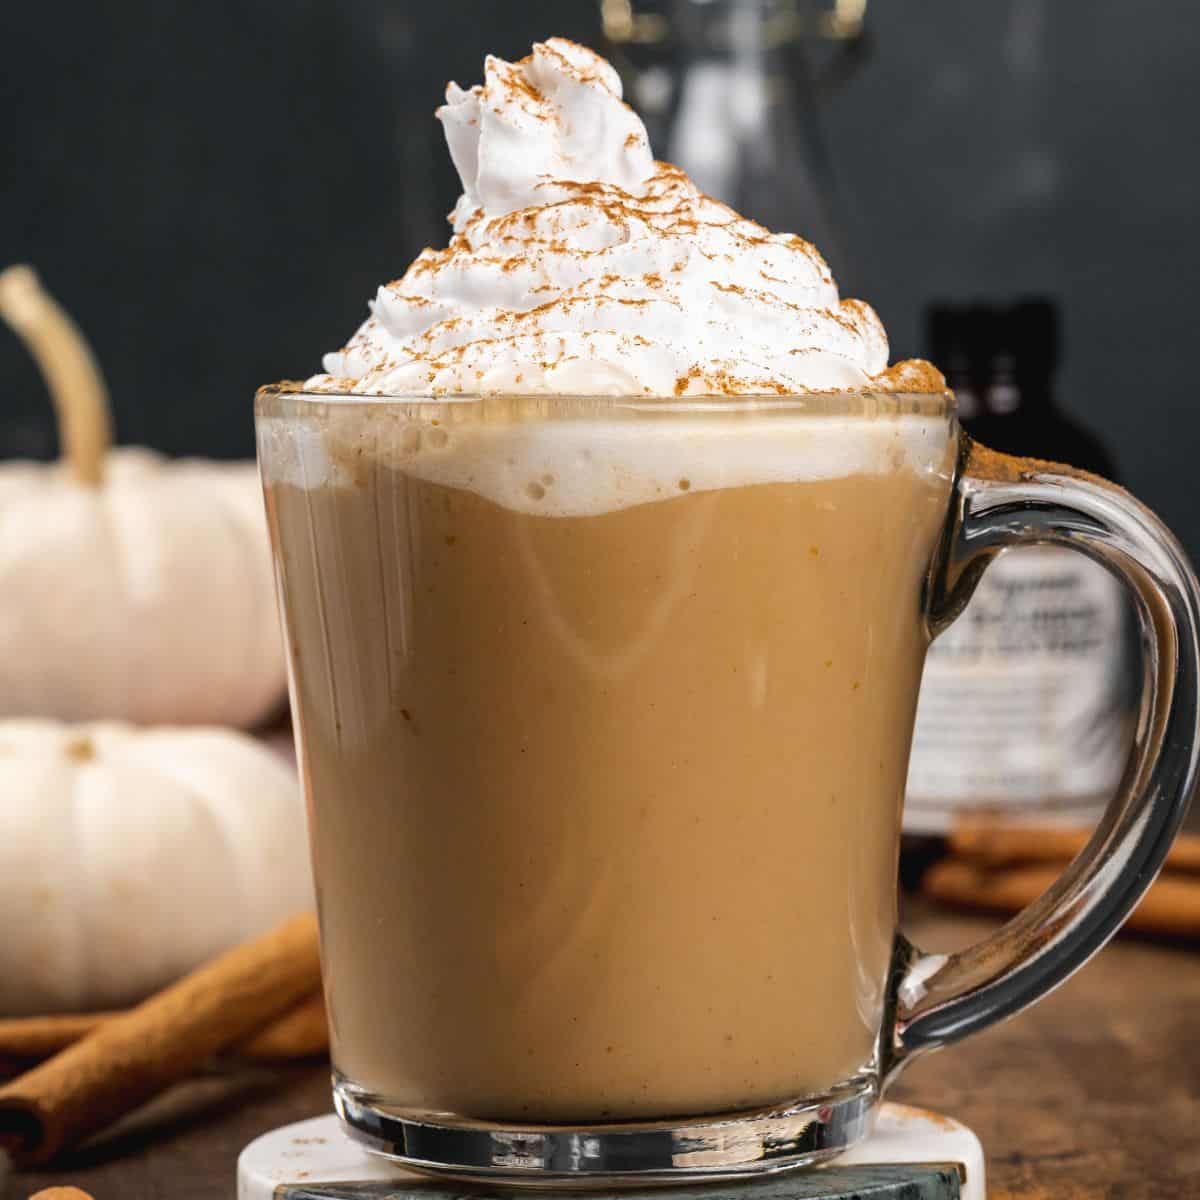 a glass mug filled with pumpkin spice latte with lots of coconut whip cream on top and is sprinkled with cinnamon. it is in front of mini pumpkins and cinnamon sticks blurred in front of a dark background.